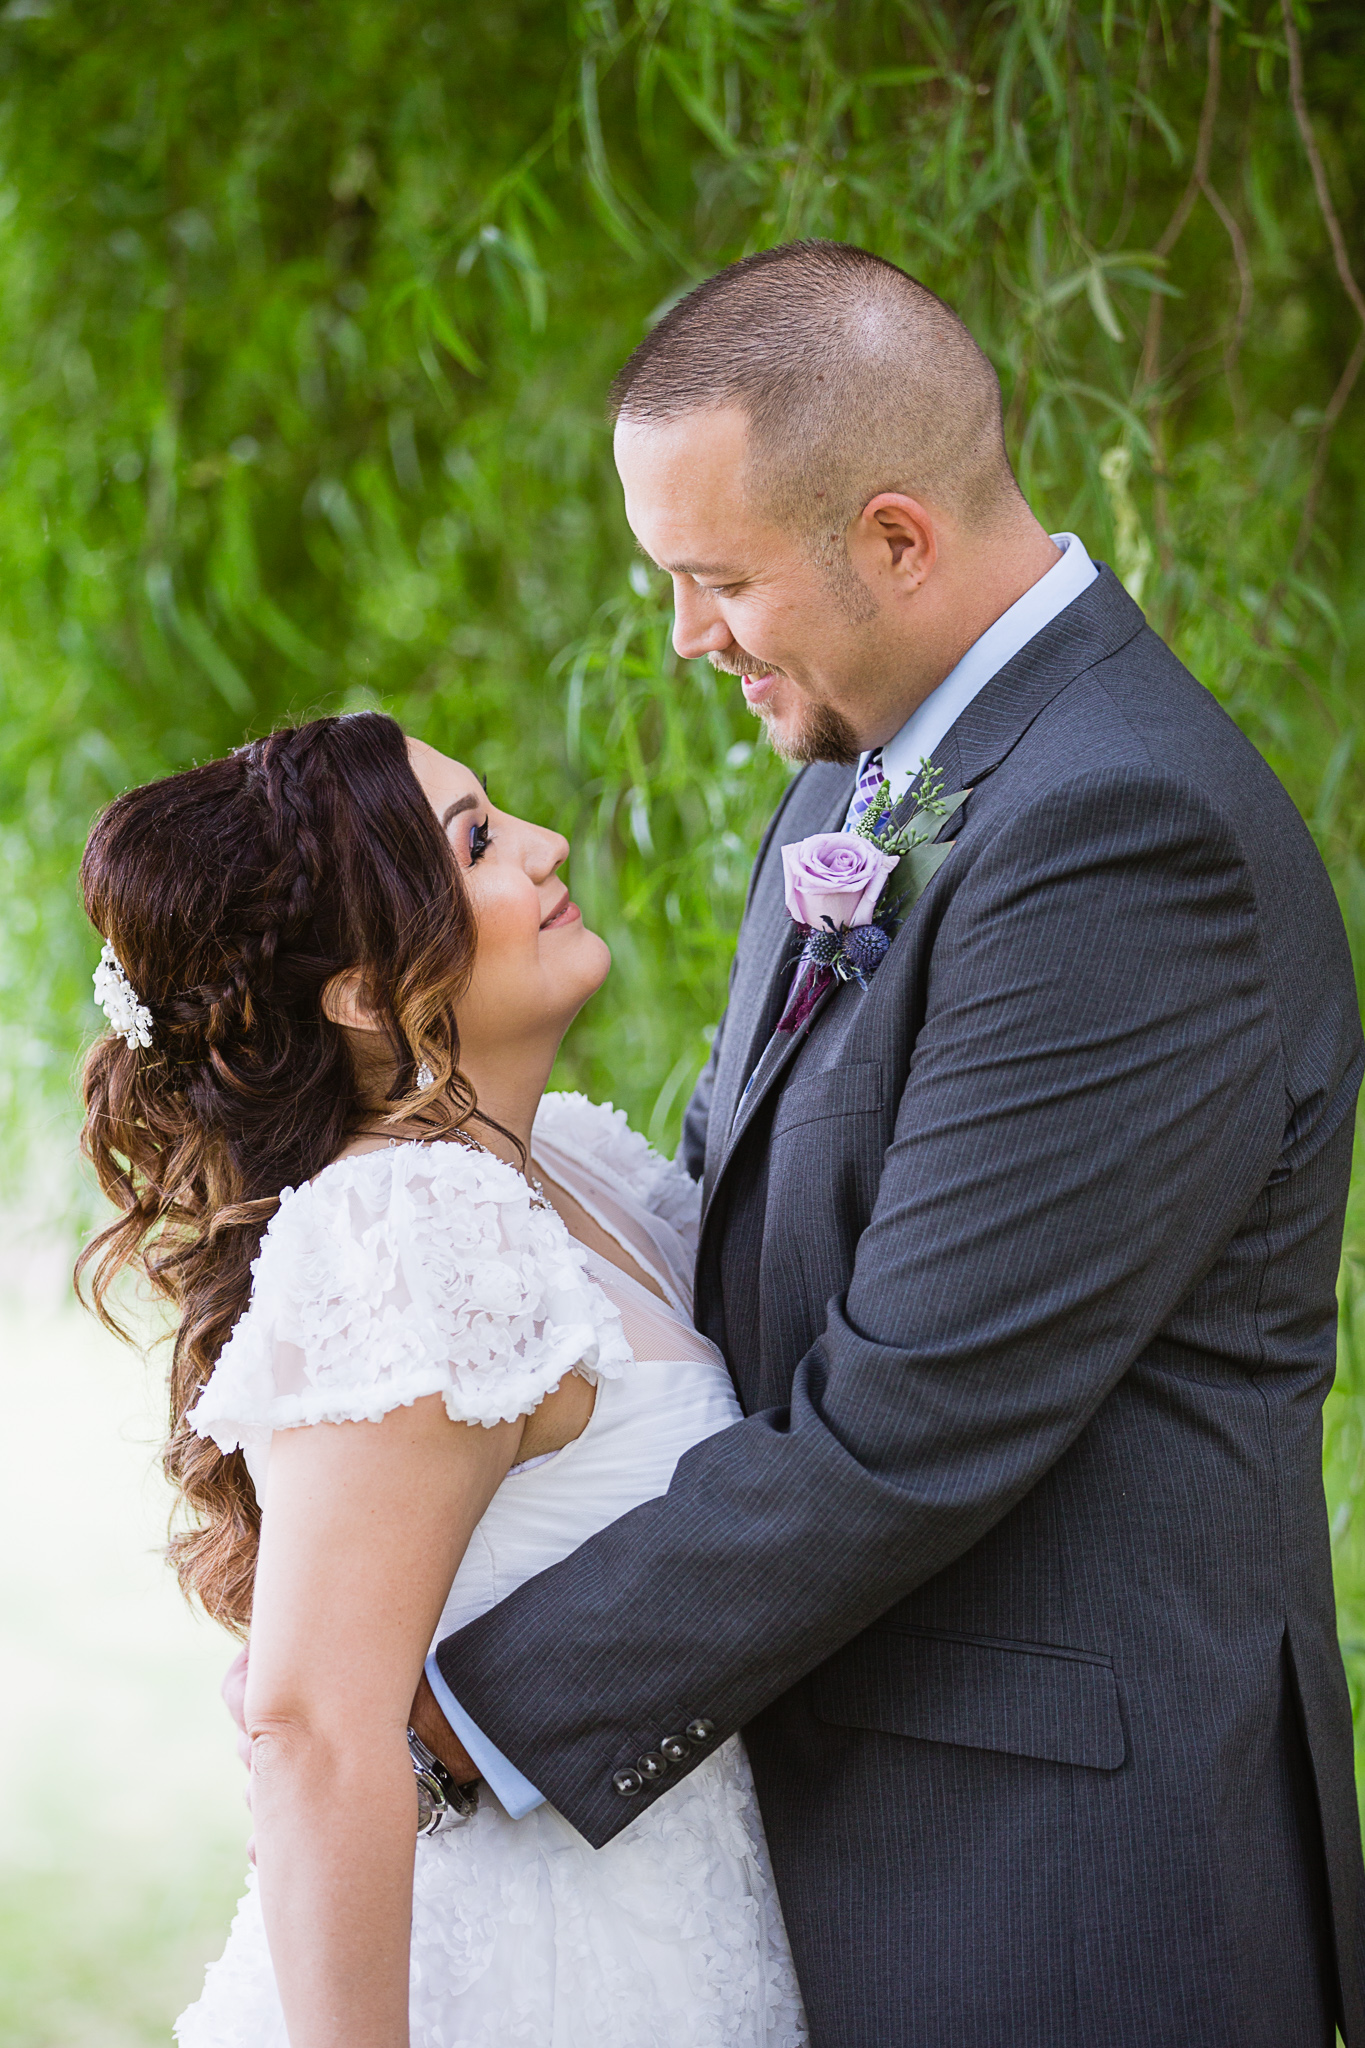 Bride and groom look lovingly at each other on their wedding day by Arizona wedding photographer PMA Photography.